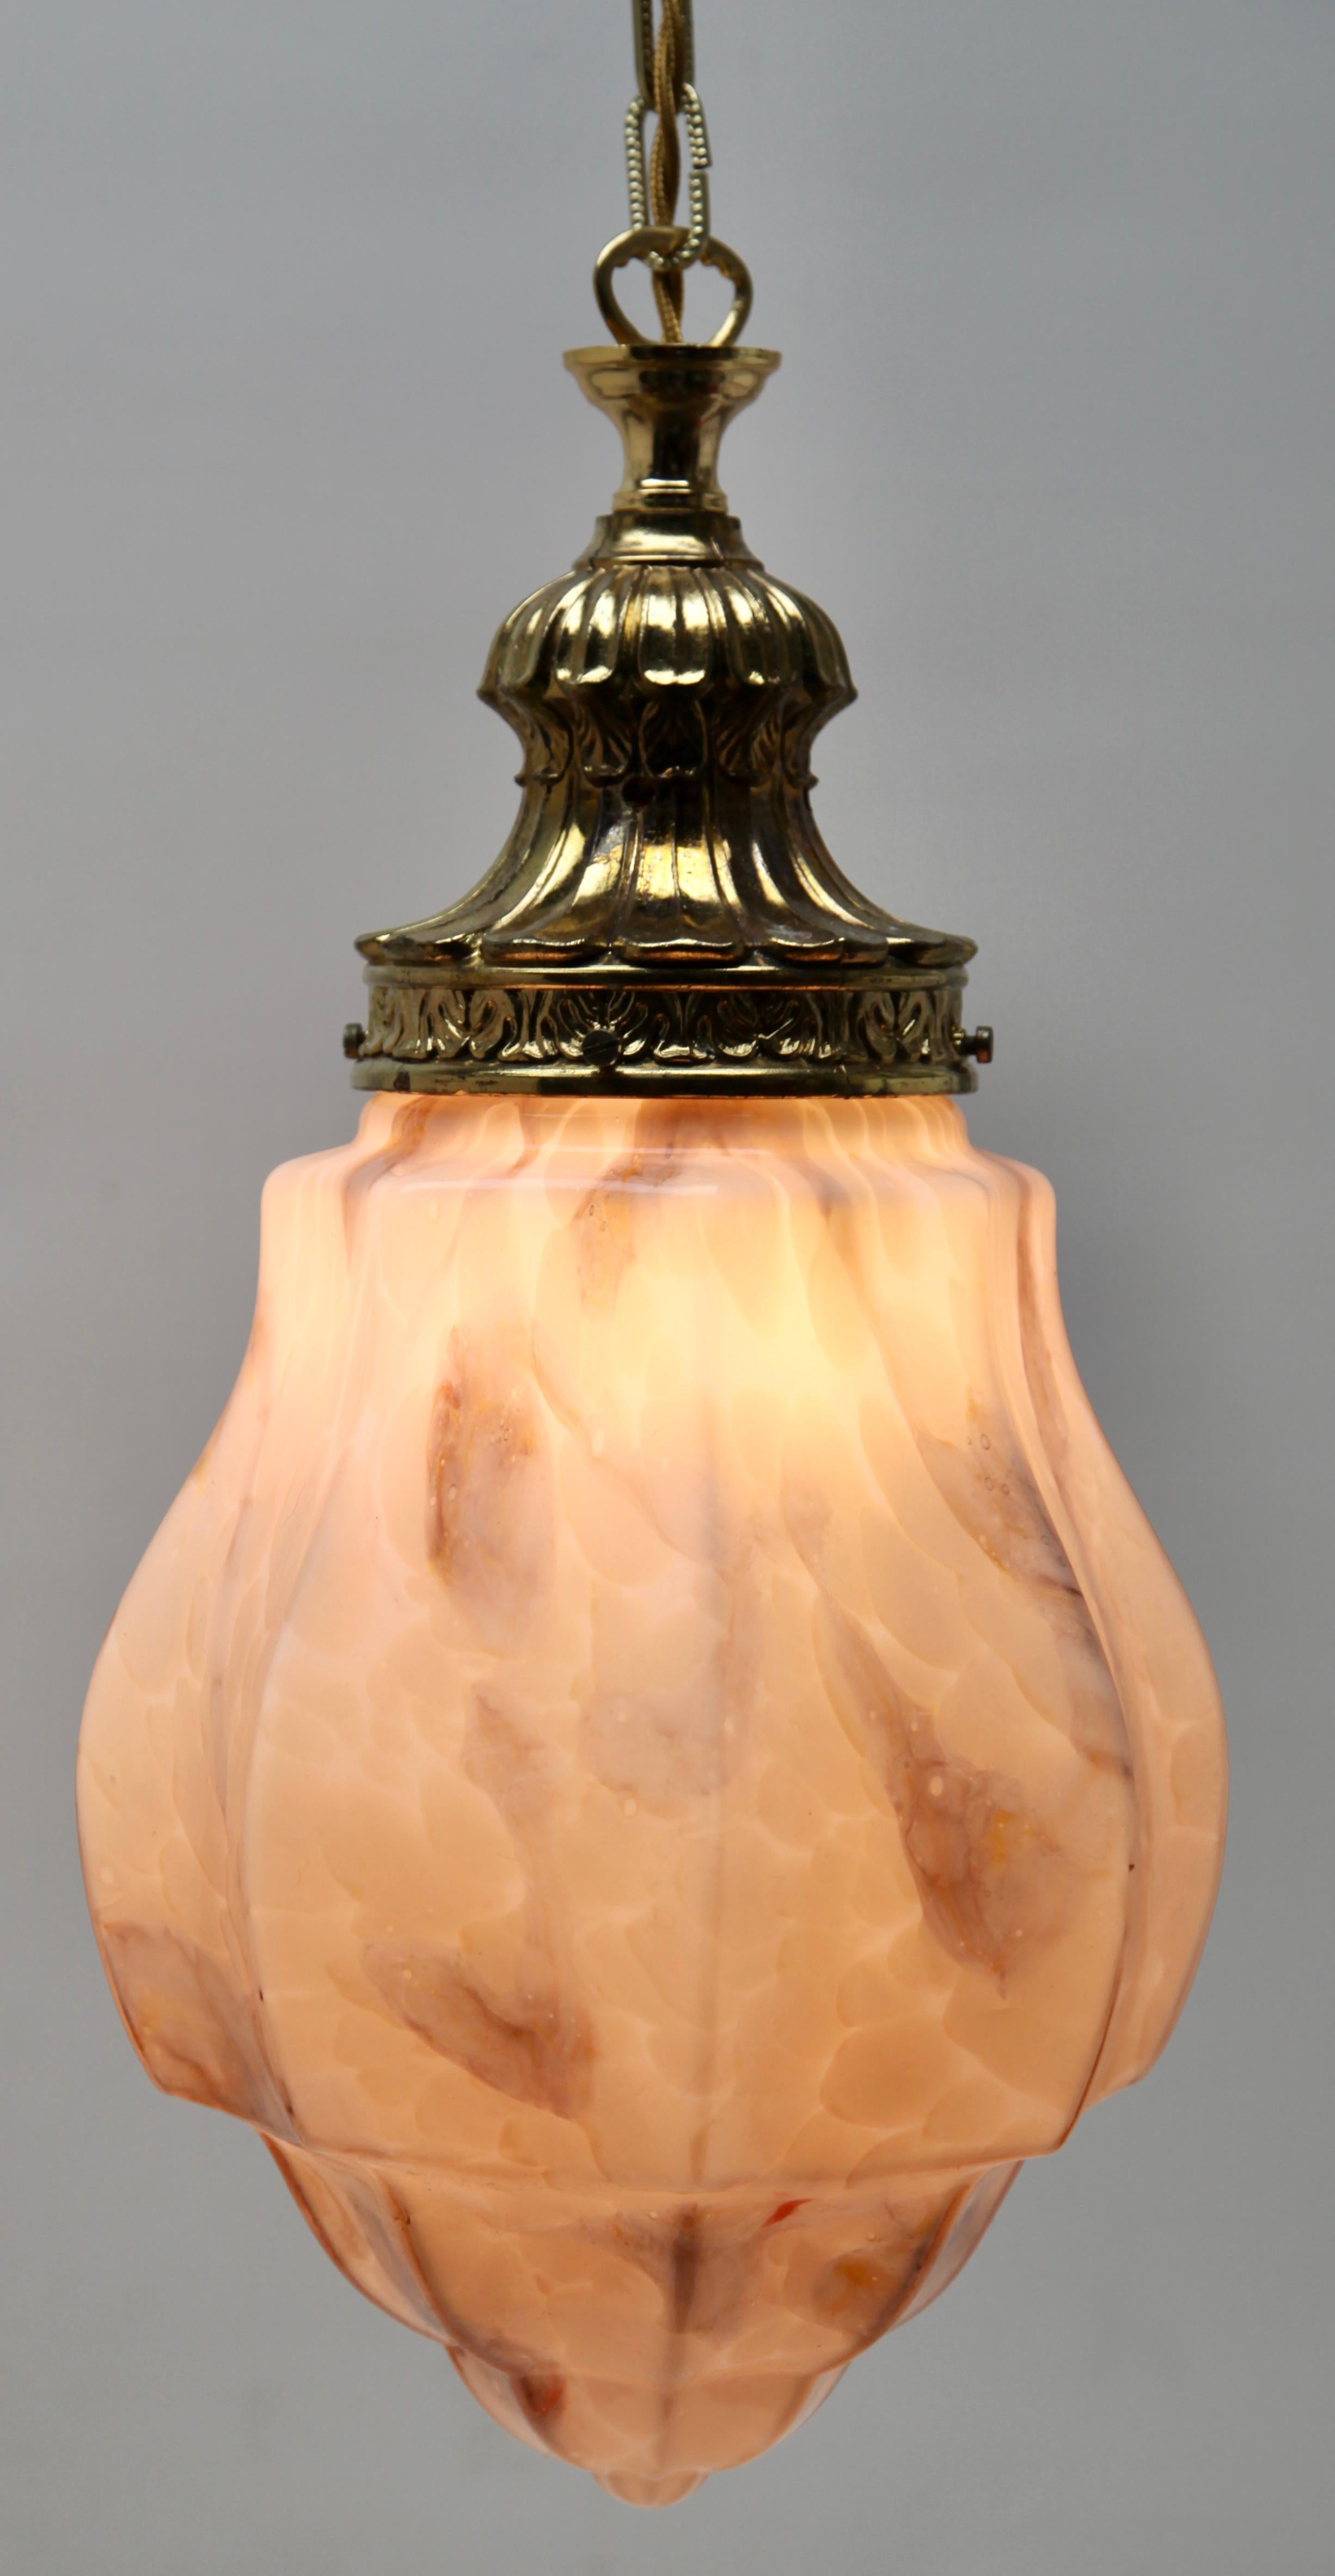 Belgian Scailmont Pendant Lamp with a Opaline Shade and Brass Fittings, 1930s, Belgium